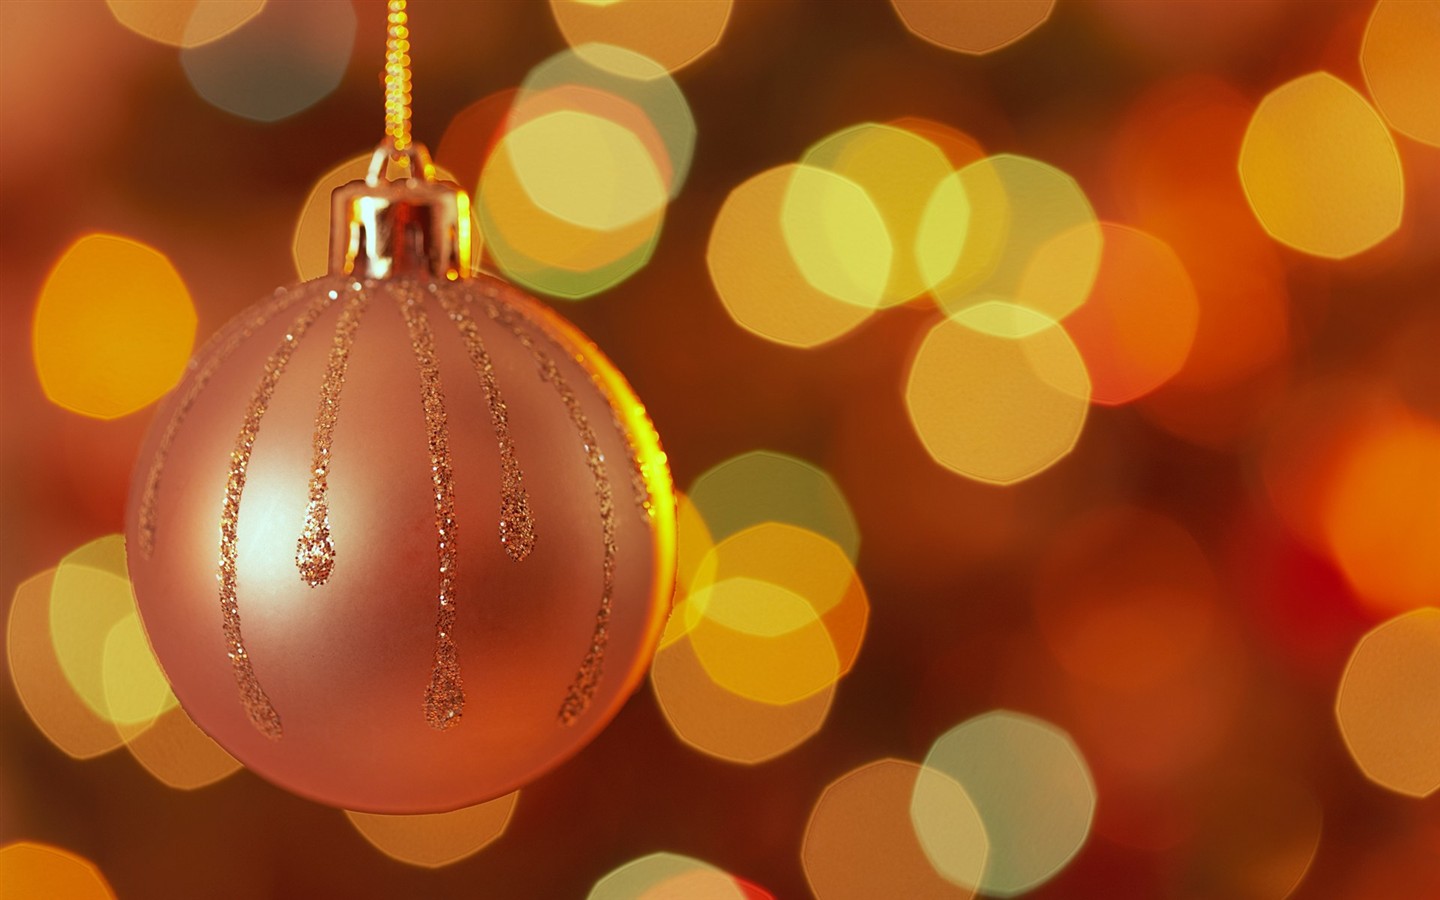 Happy Christmas decorations wallpapers #23 - 1440x900